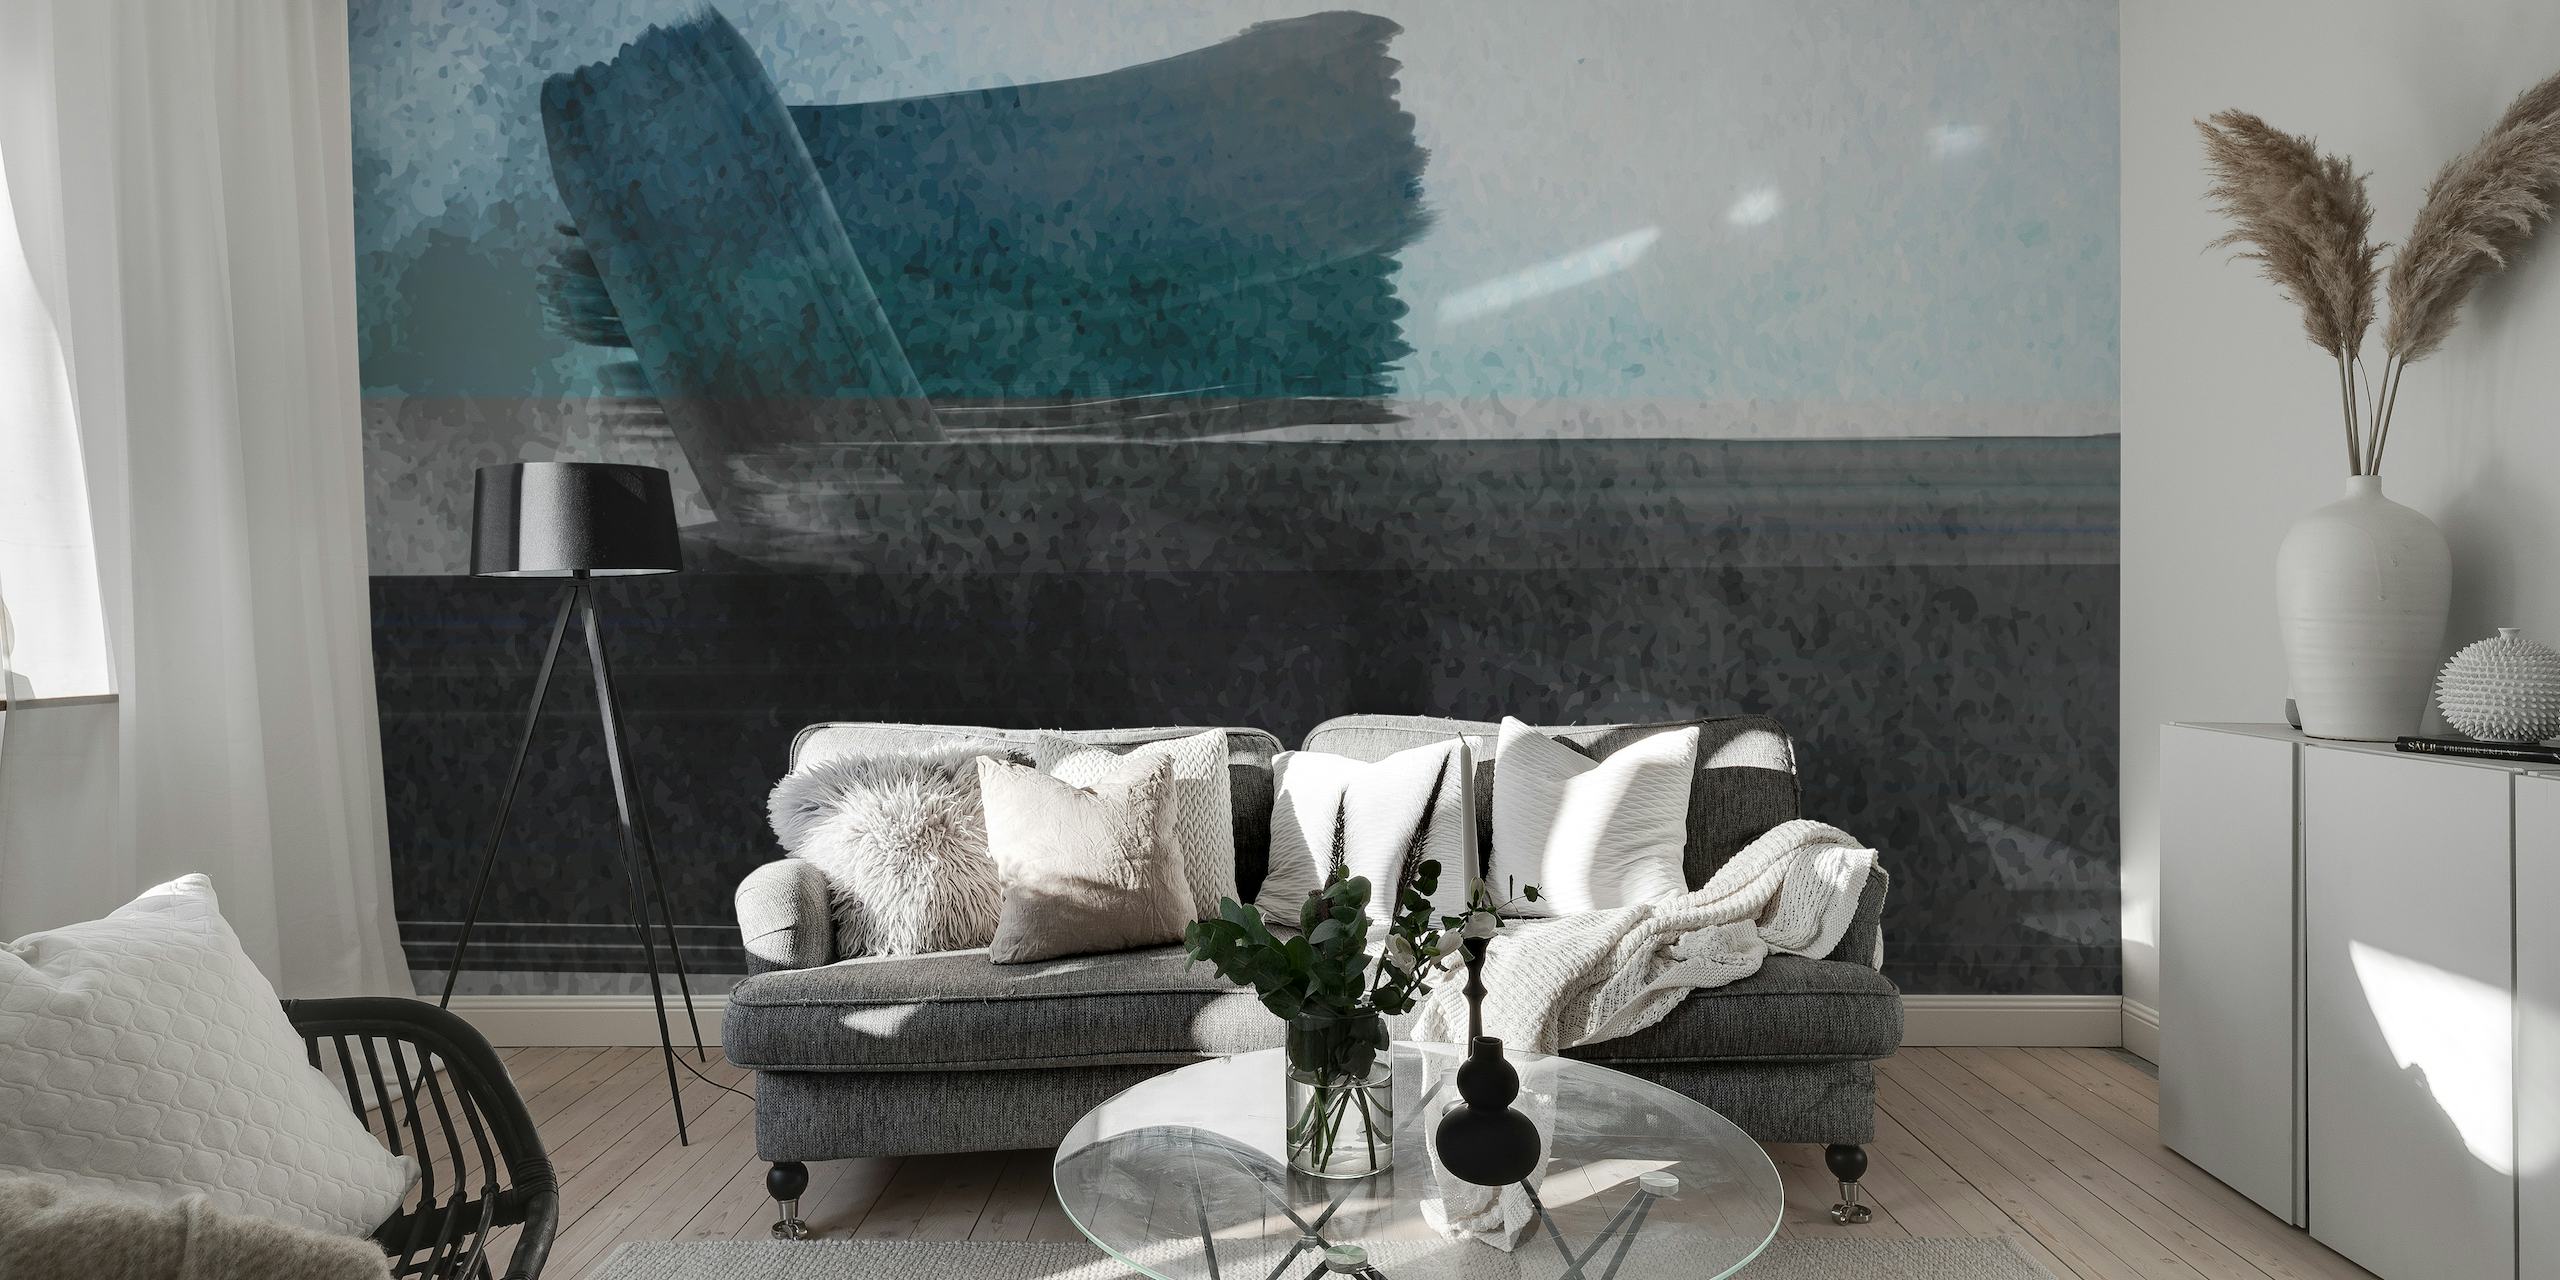 Teal and gray abstract watercolor wall mural with geometric patterns